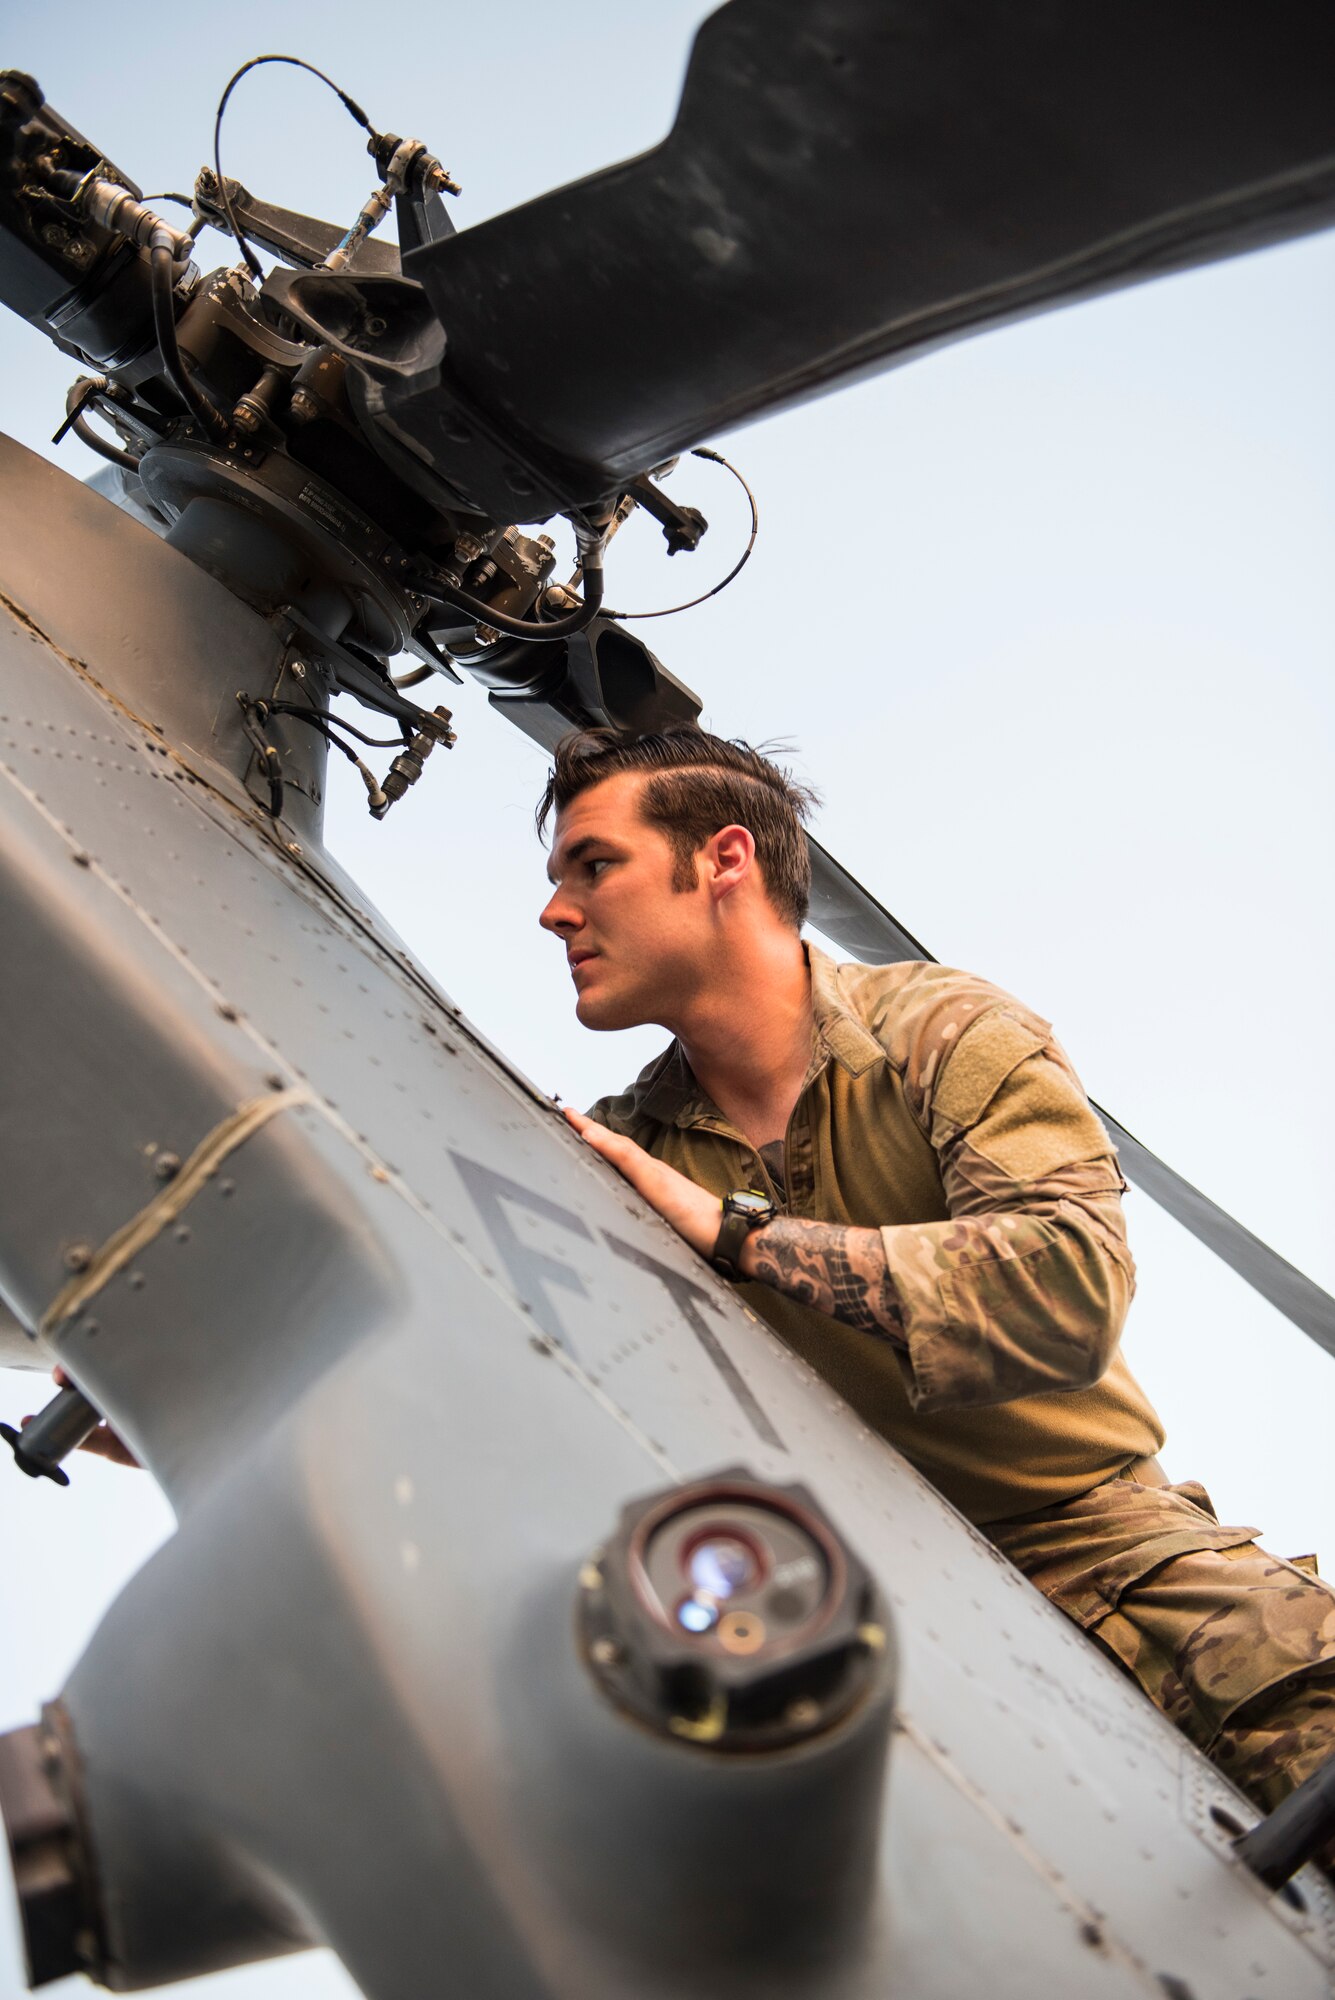 Staff Sgt. Joshua Boehnlein, a special missions aviator assigned to the 56th Rescue Squadron, Aviano Air Base, Italy, inspects tail rotor components on an HH-60G Pave Hawk helicopter June 11, 2018 at Nellis Air Force Base, Nev. Boehnlein was preparing the aircraft for a large-scale U.S. Air Force Weapons School Integration Phase training exercise. (U.S. Air Force photo by Staff Sgt. Joshua Kleinholz)